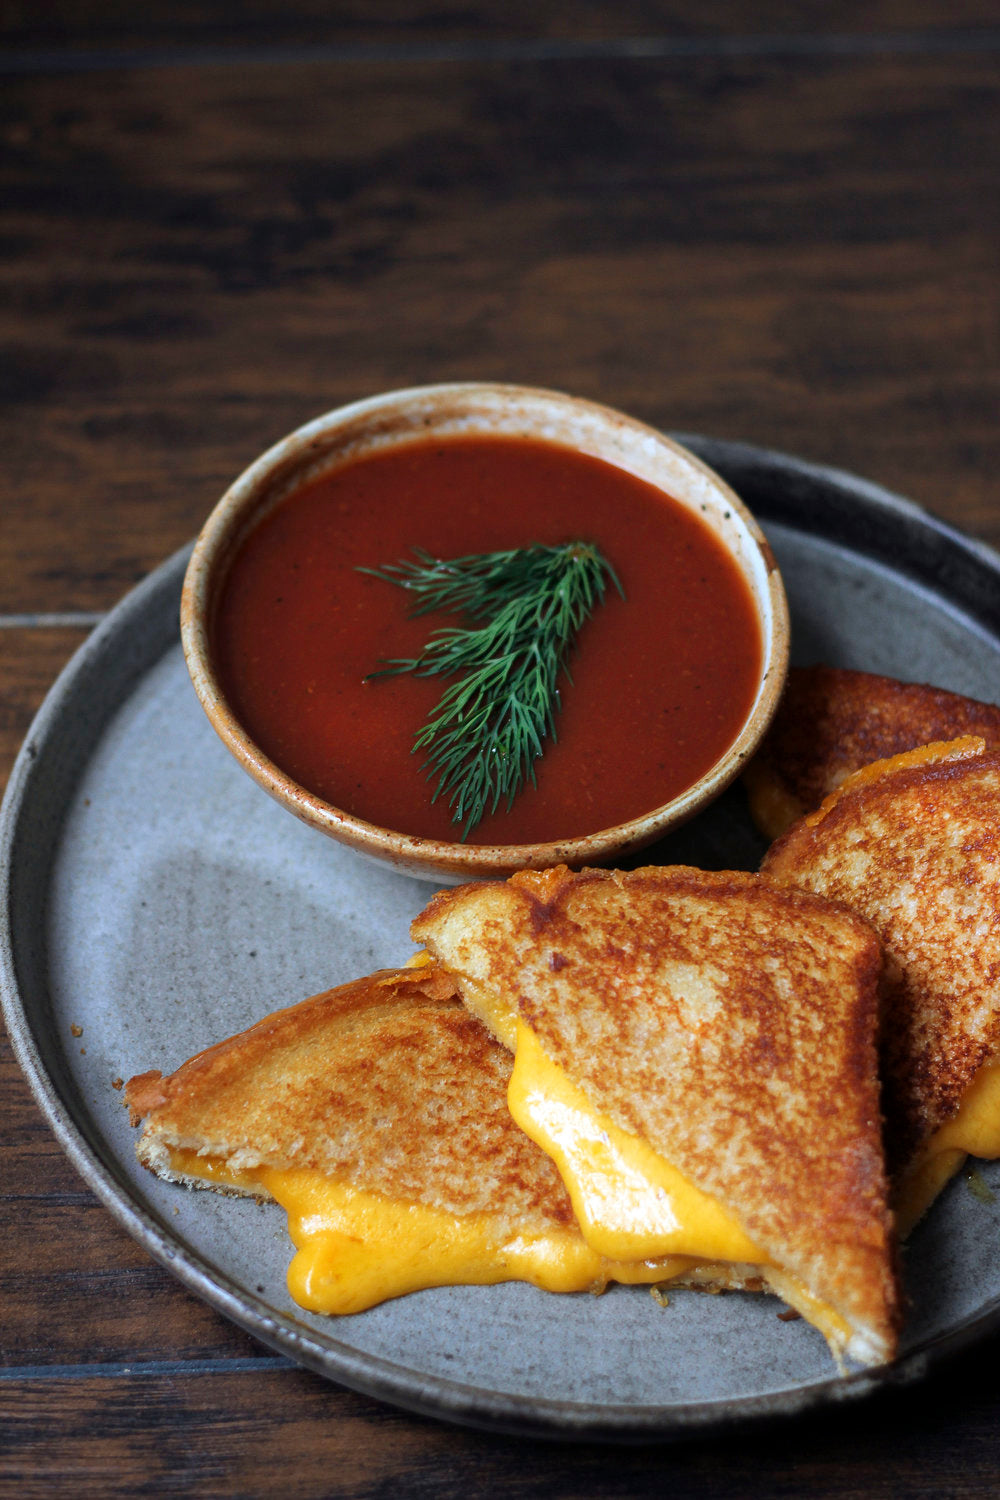 Grilled Cheese + Bloody Mary Tomato Soup